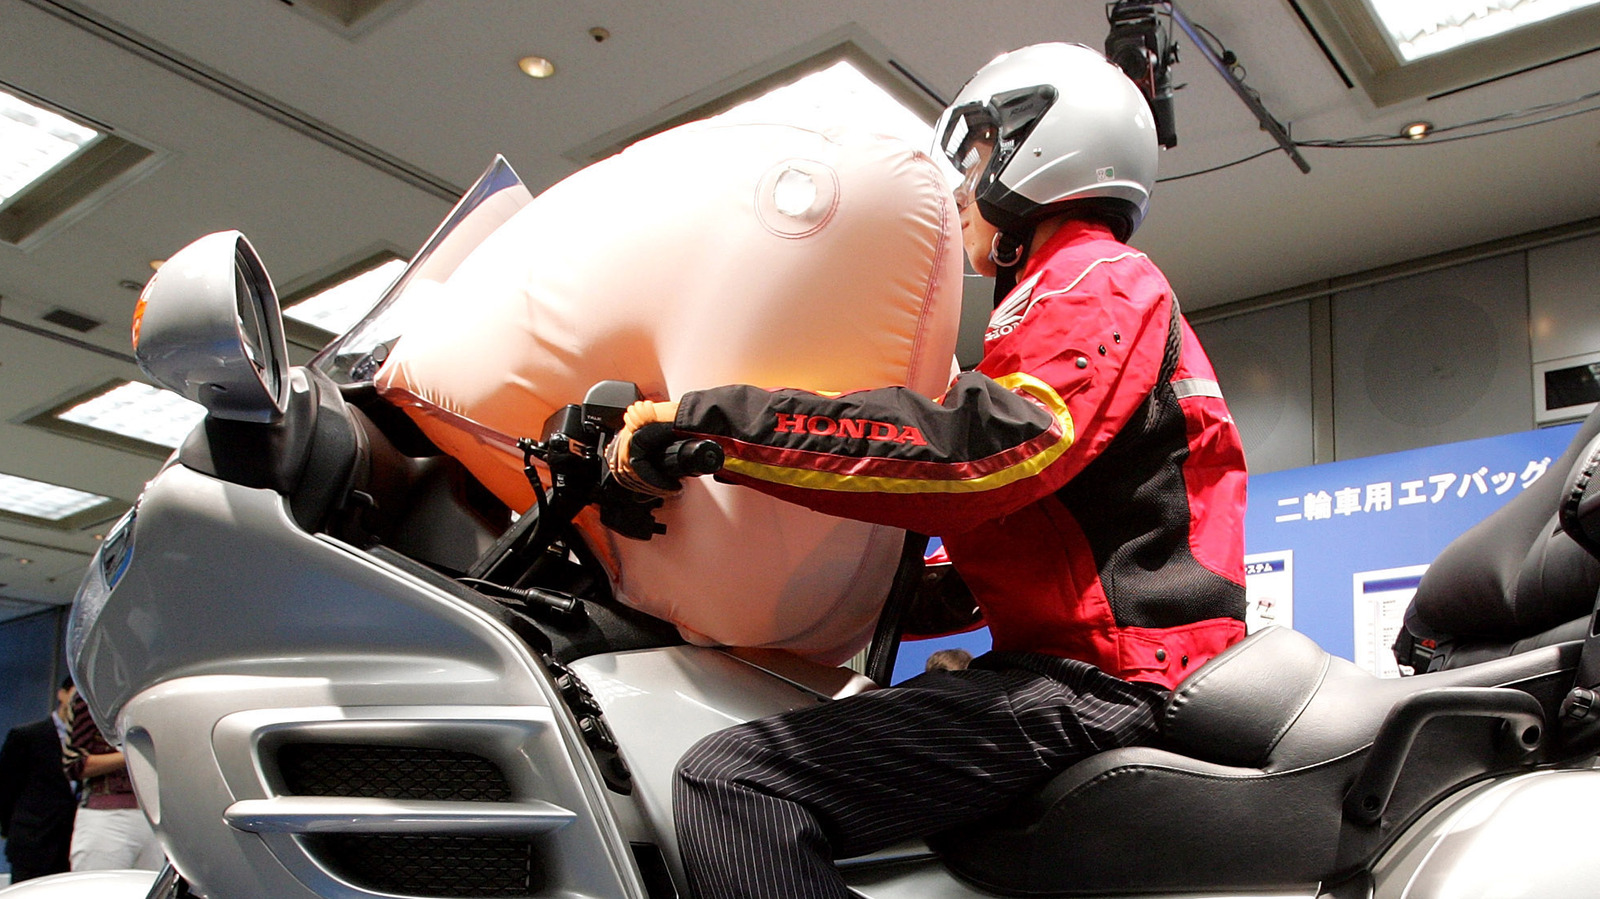 https://www.slashgear.com/img/gallery/the-real-reason-why-nobody-uses-motorcycle-airbags/l-intro-1656607700.jpg